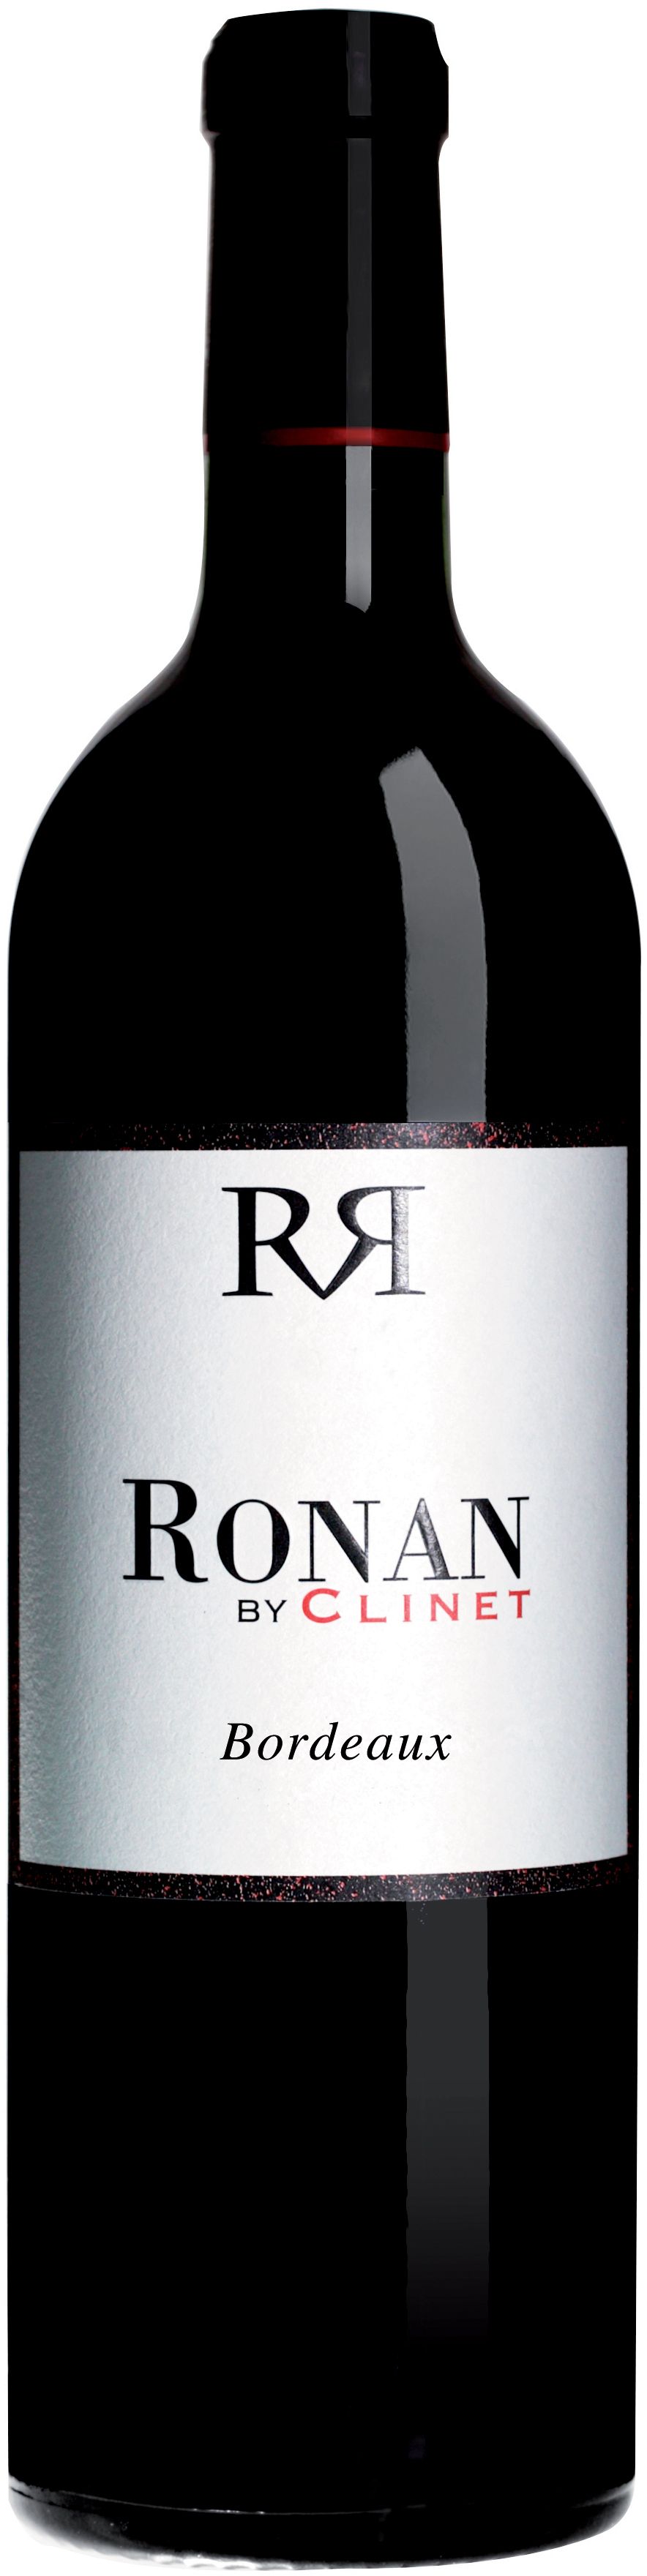 Chateau Clinet, Ronan By Clinet Rouge, 2015